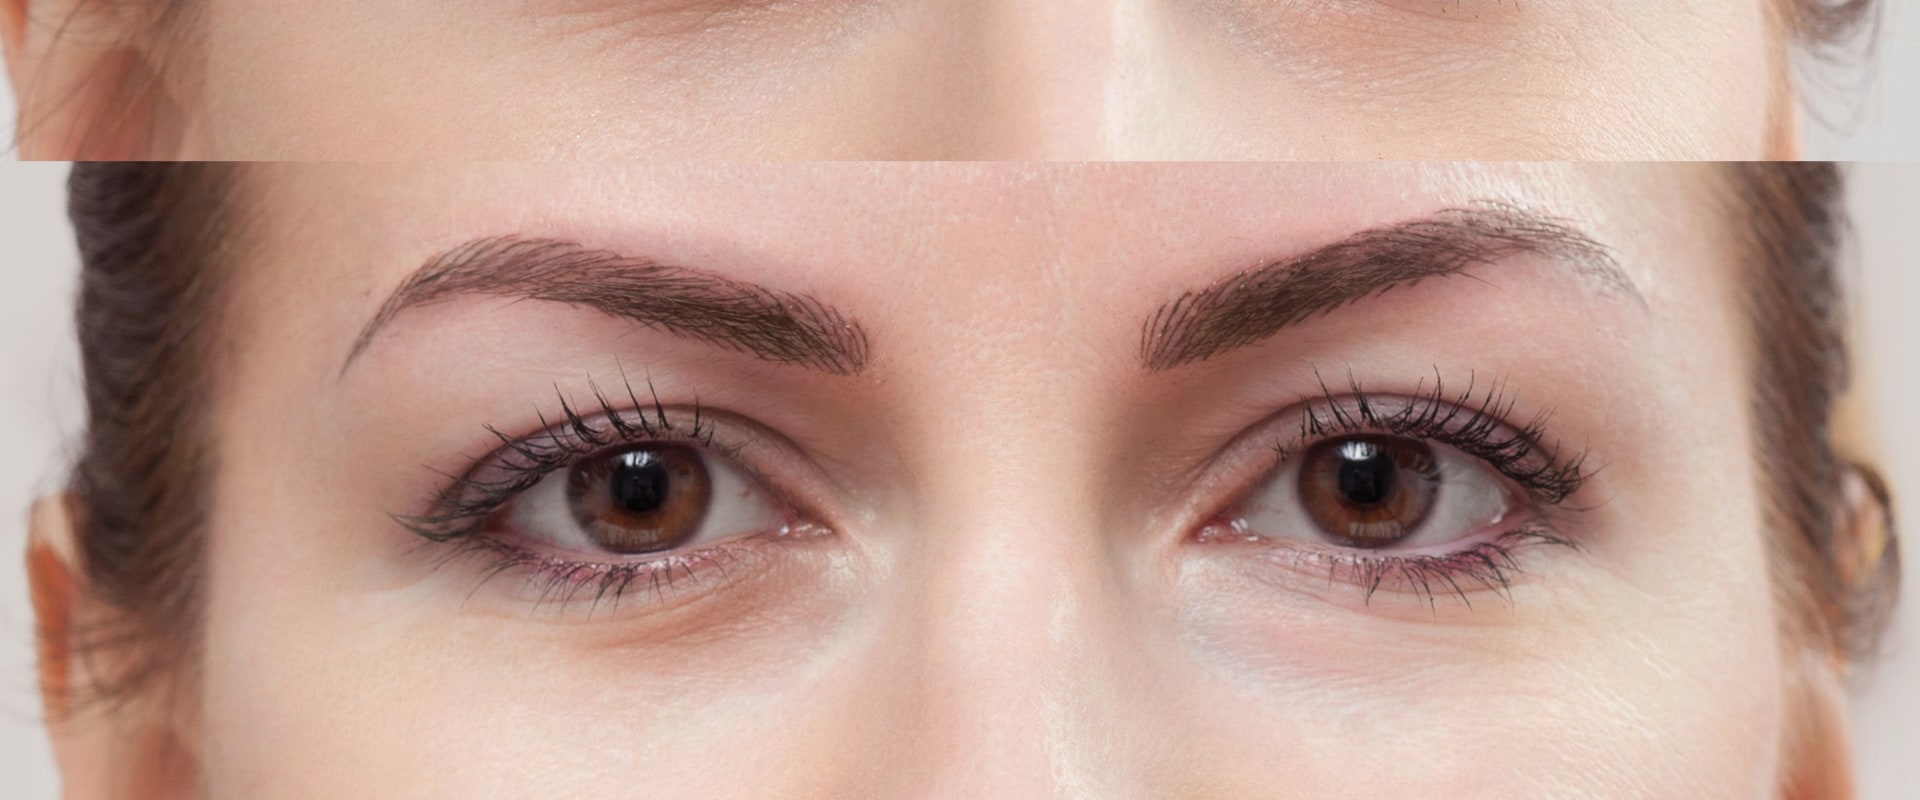 Which lasts longer microblading or tattooing eyebrows?